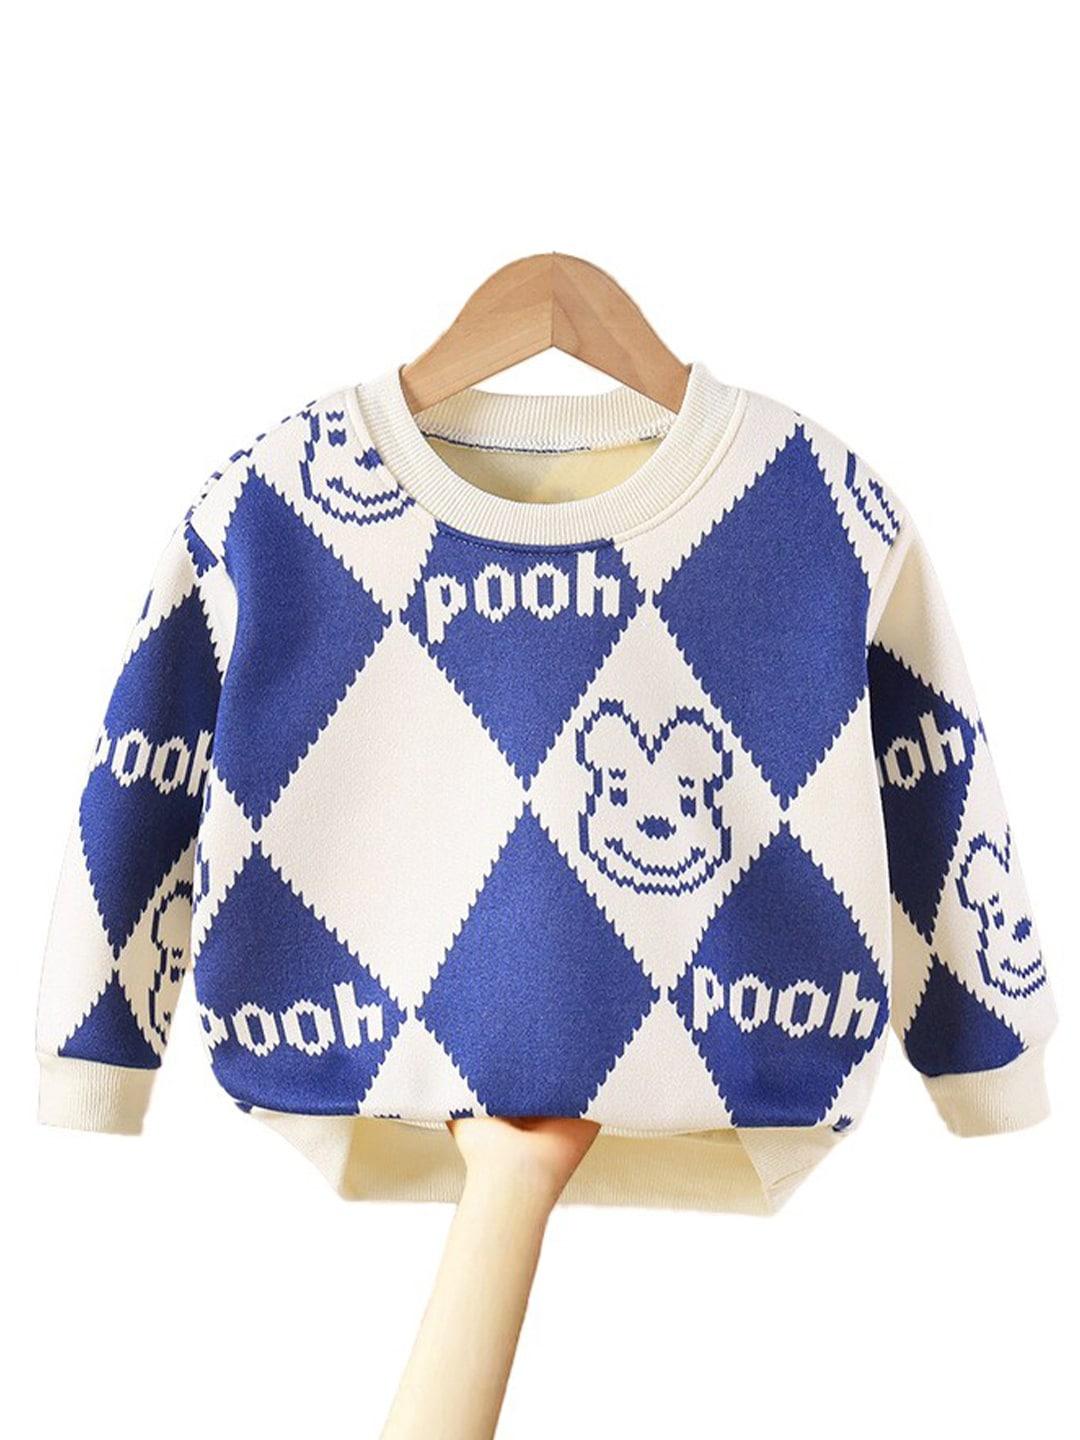 stylecast-boys-blue-&-white-geometric-printed-cotton-pullover-sweaters